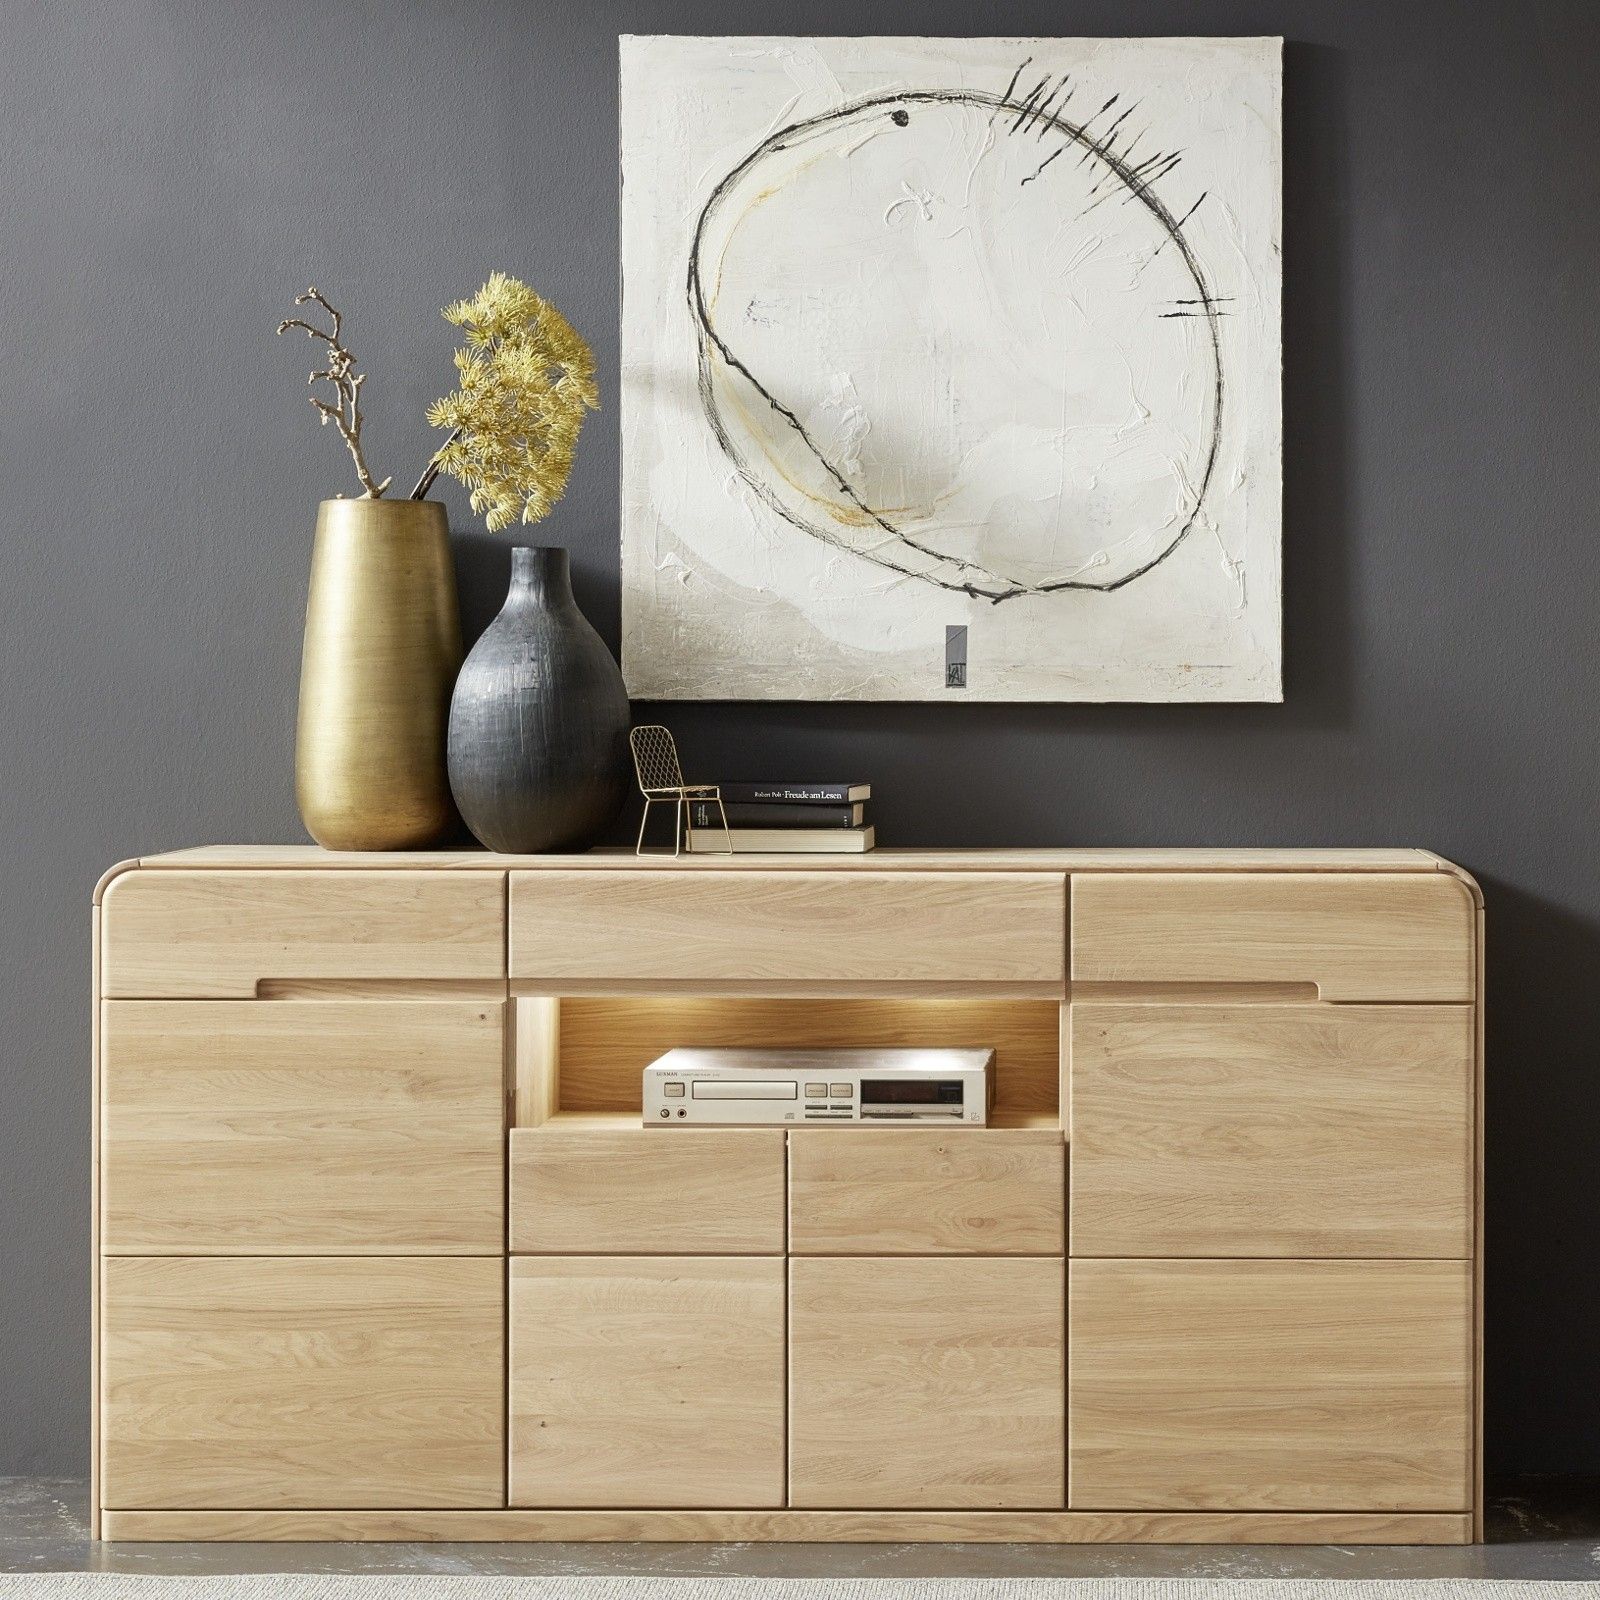 Holz Sideboards Online Kaufen | Möbel Suchmaschine For Most Up To Date Lanesboro Sideboards (View 12 of 20)